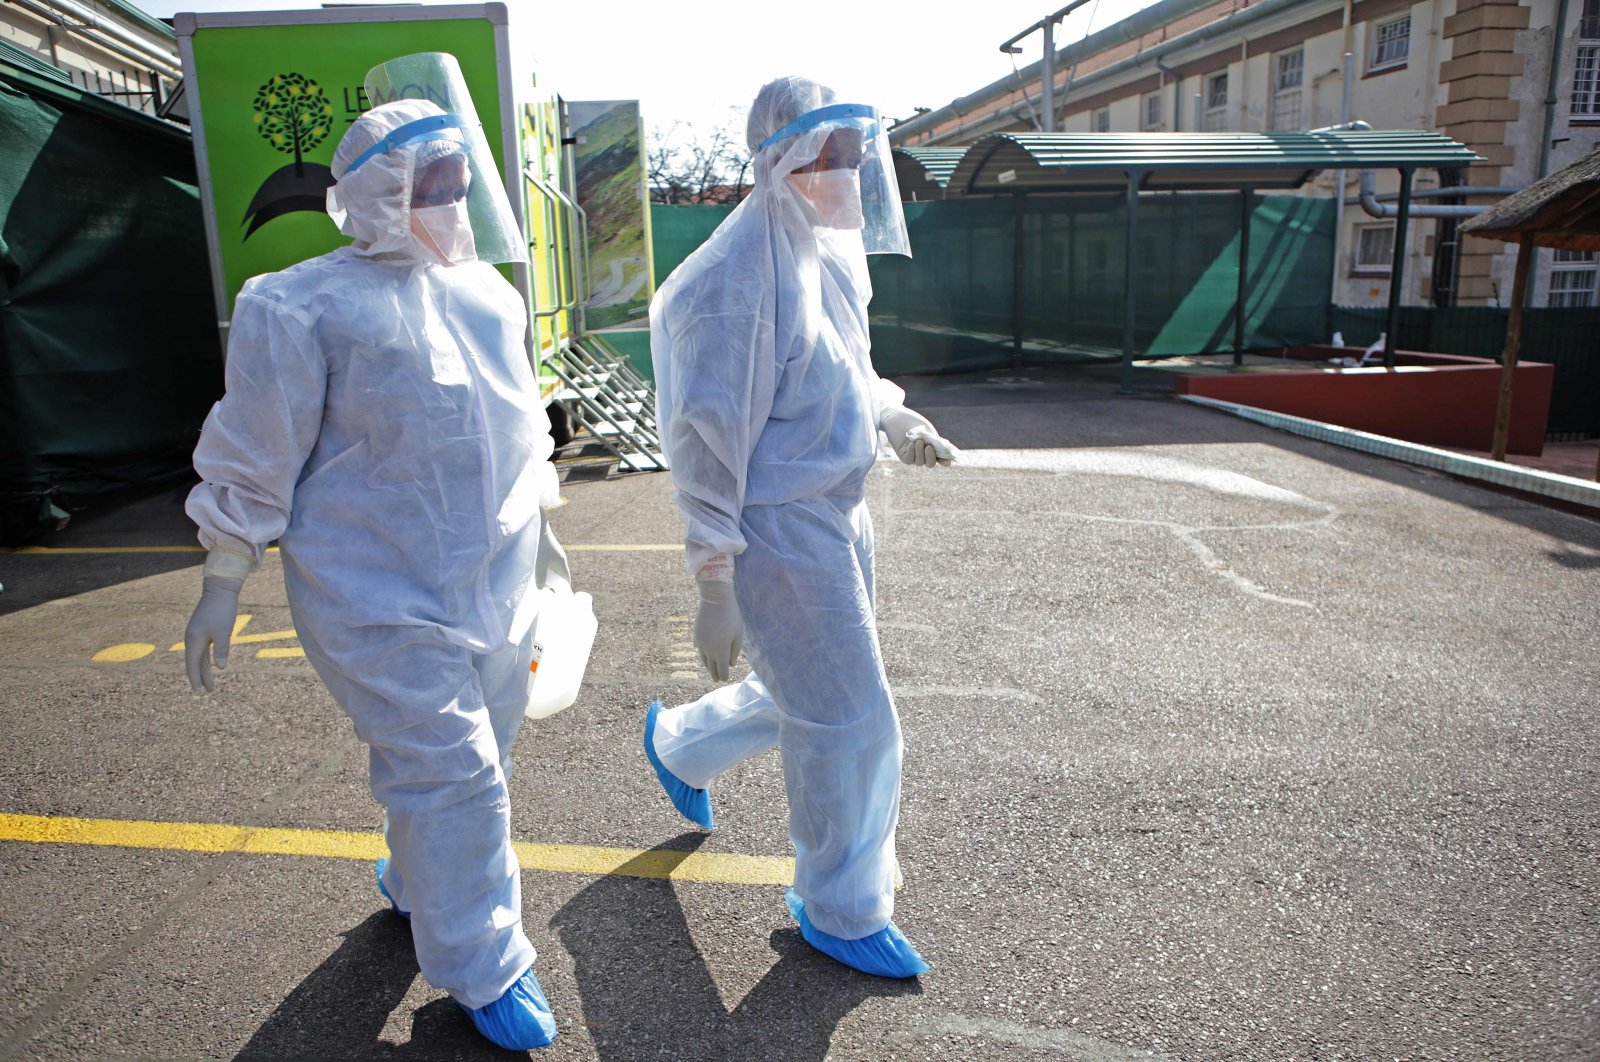 Professional health care workers wearing personal protective equipment (PPE) make their way to tents dedicated to the treatment of possible COVID-19 coronavirus patients at the Tshwane District Hospital, Pretoria, South Africa, July 10, 2020. (AFP Photo)